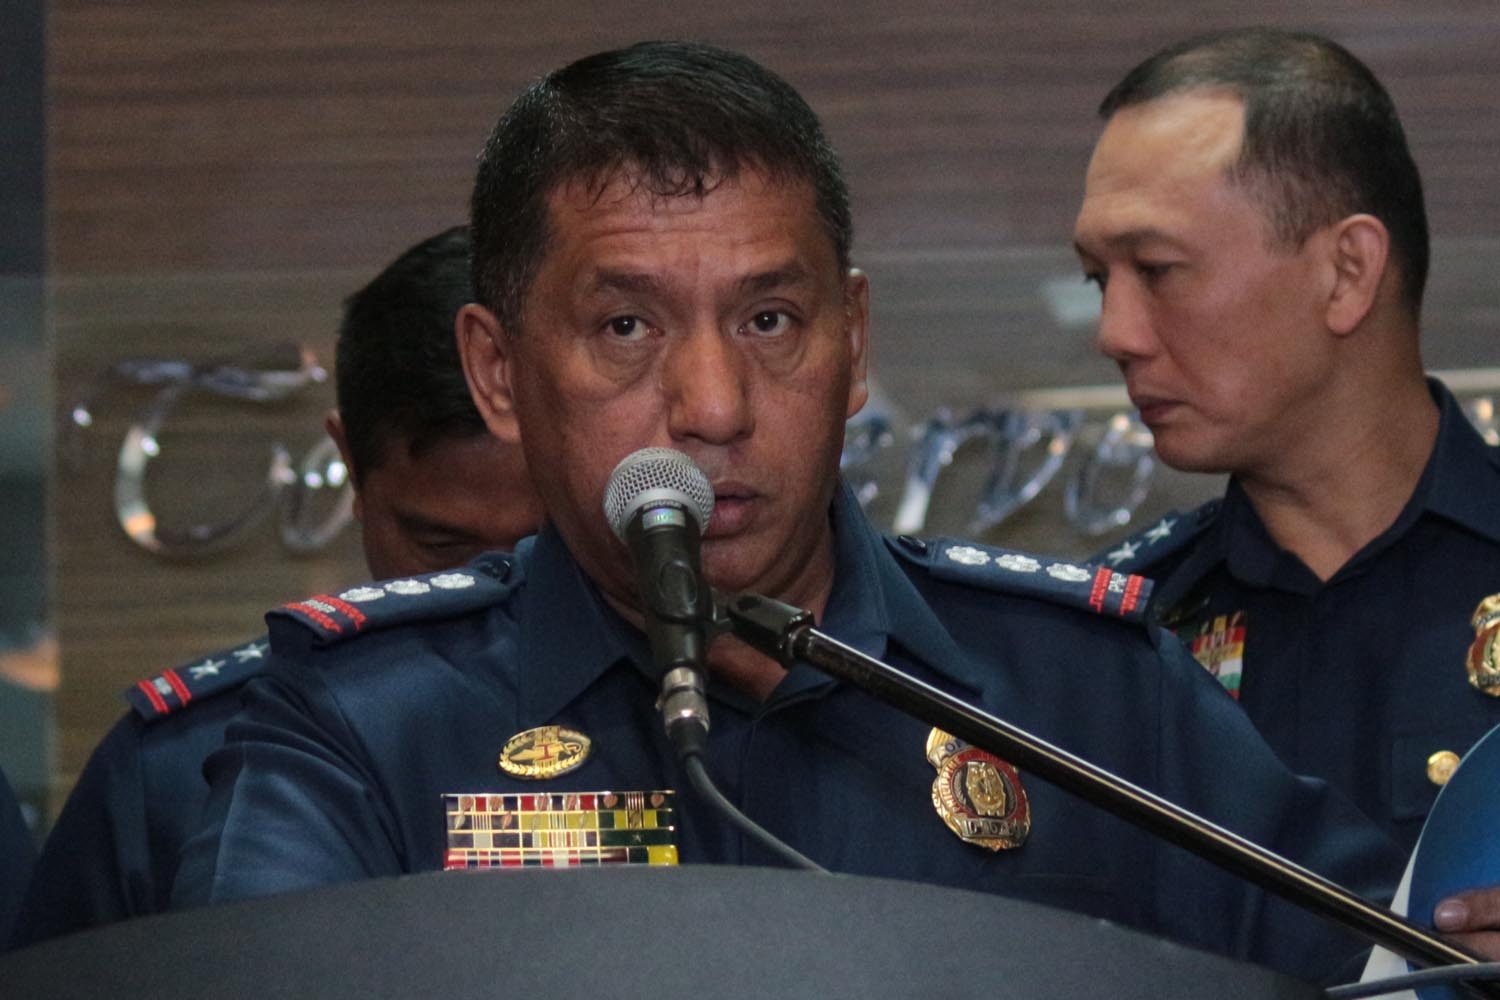 What’s the new PNP Drug Enforcement Group like?